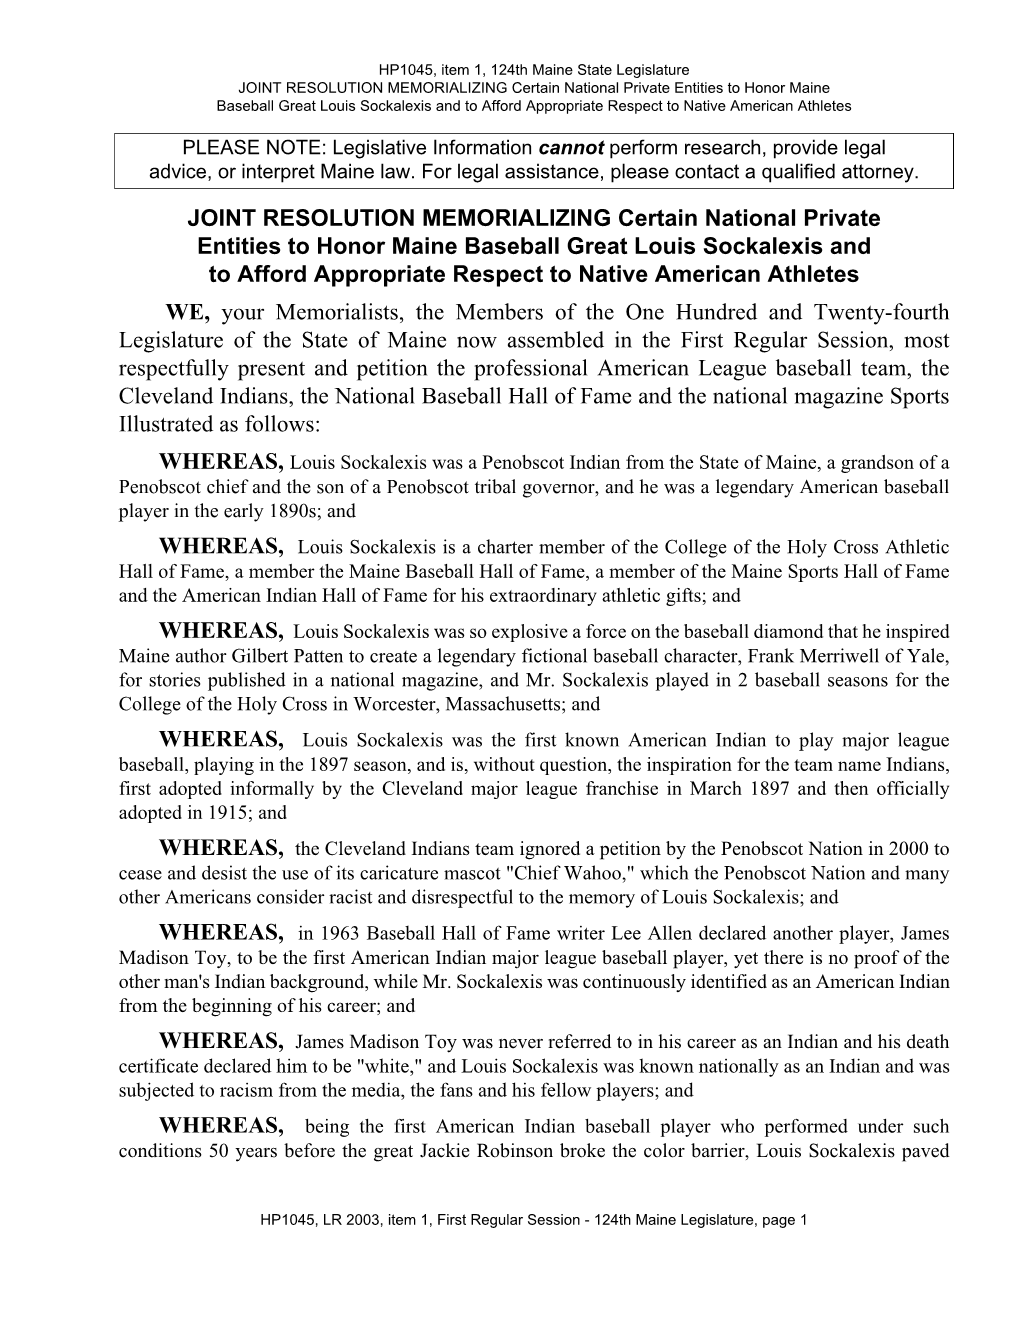 JOINT RESOLUTION MEMORIALIZING Certain National